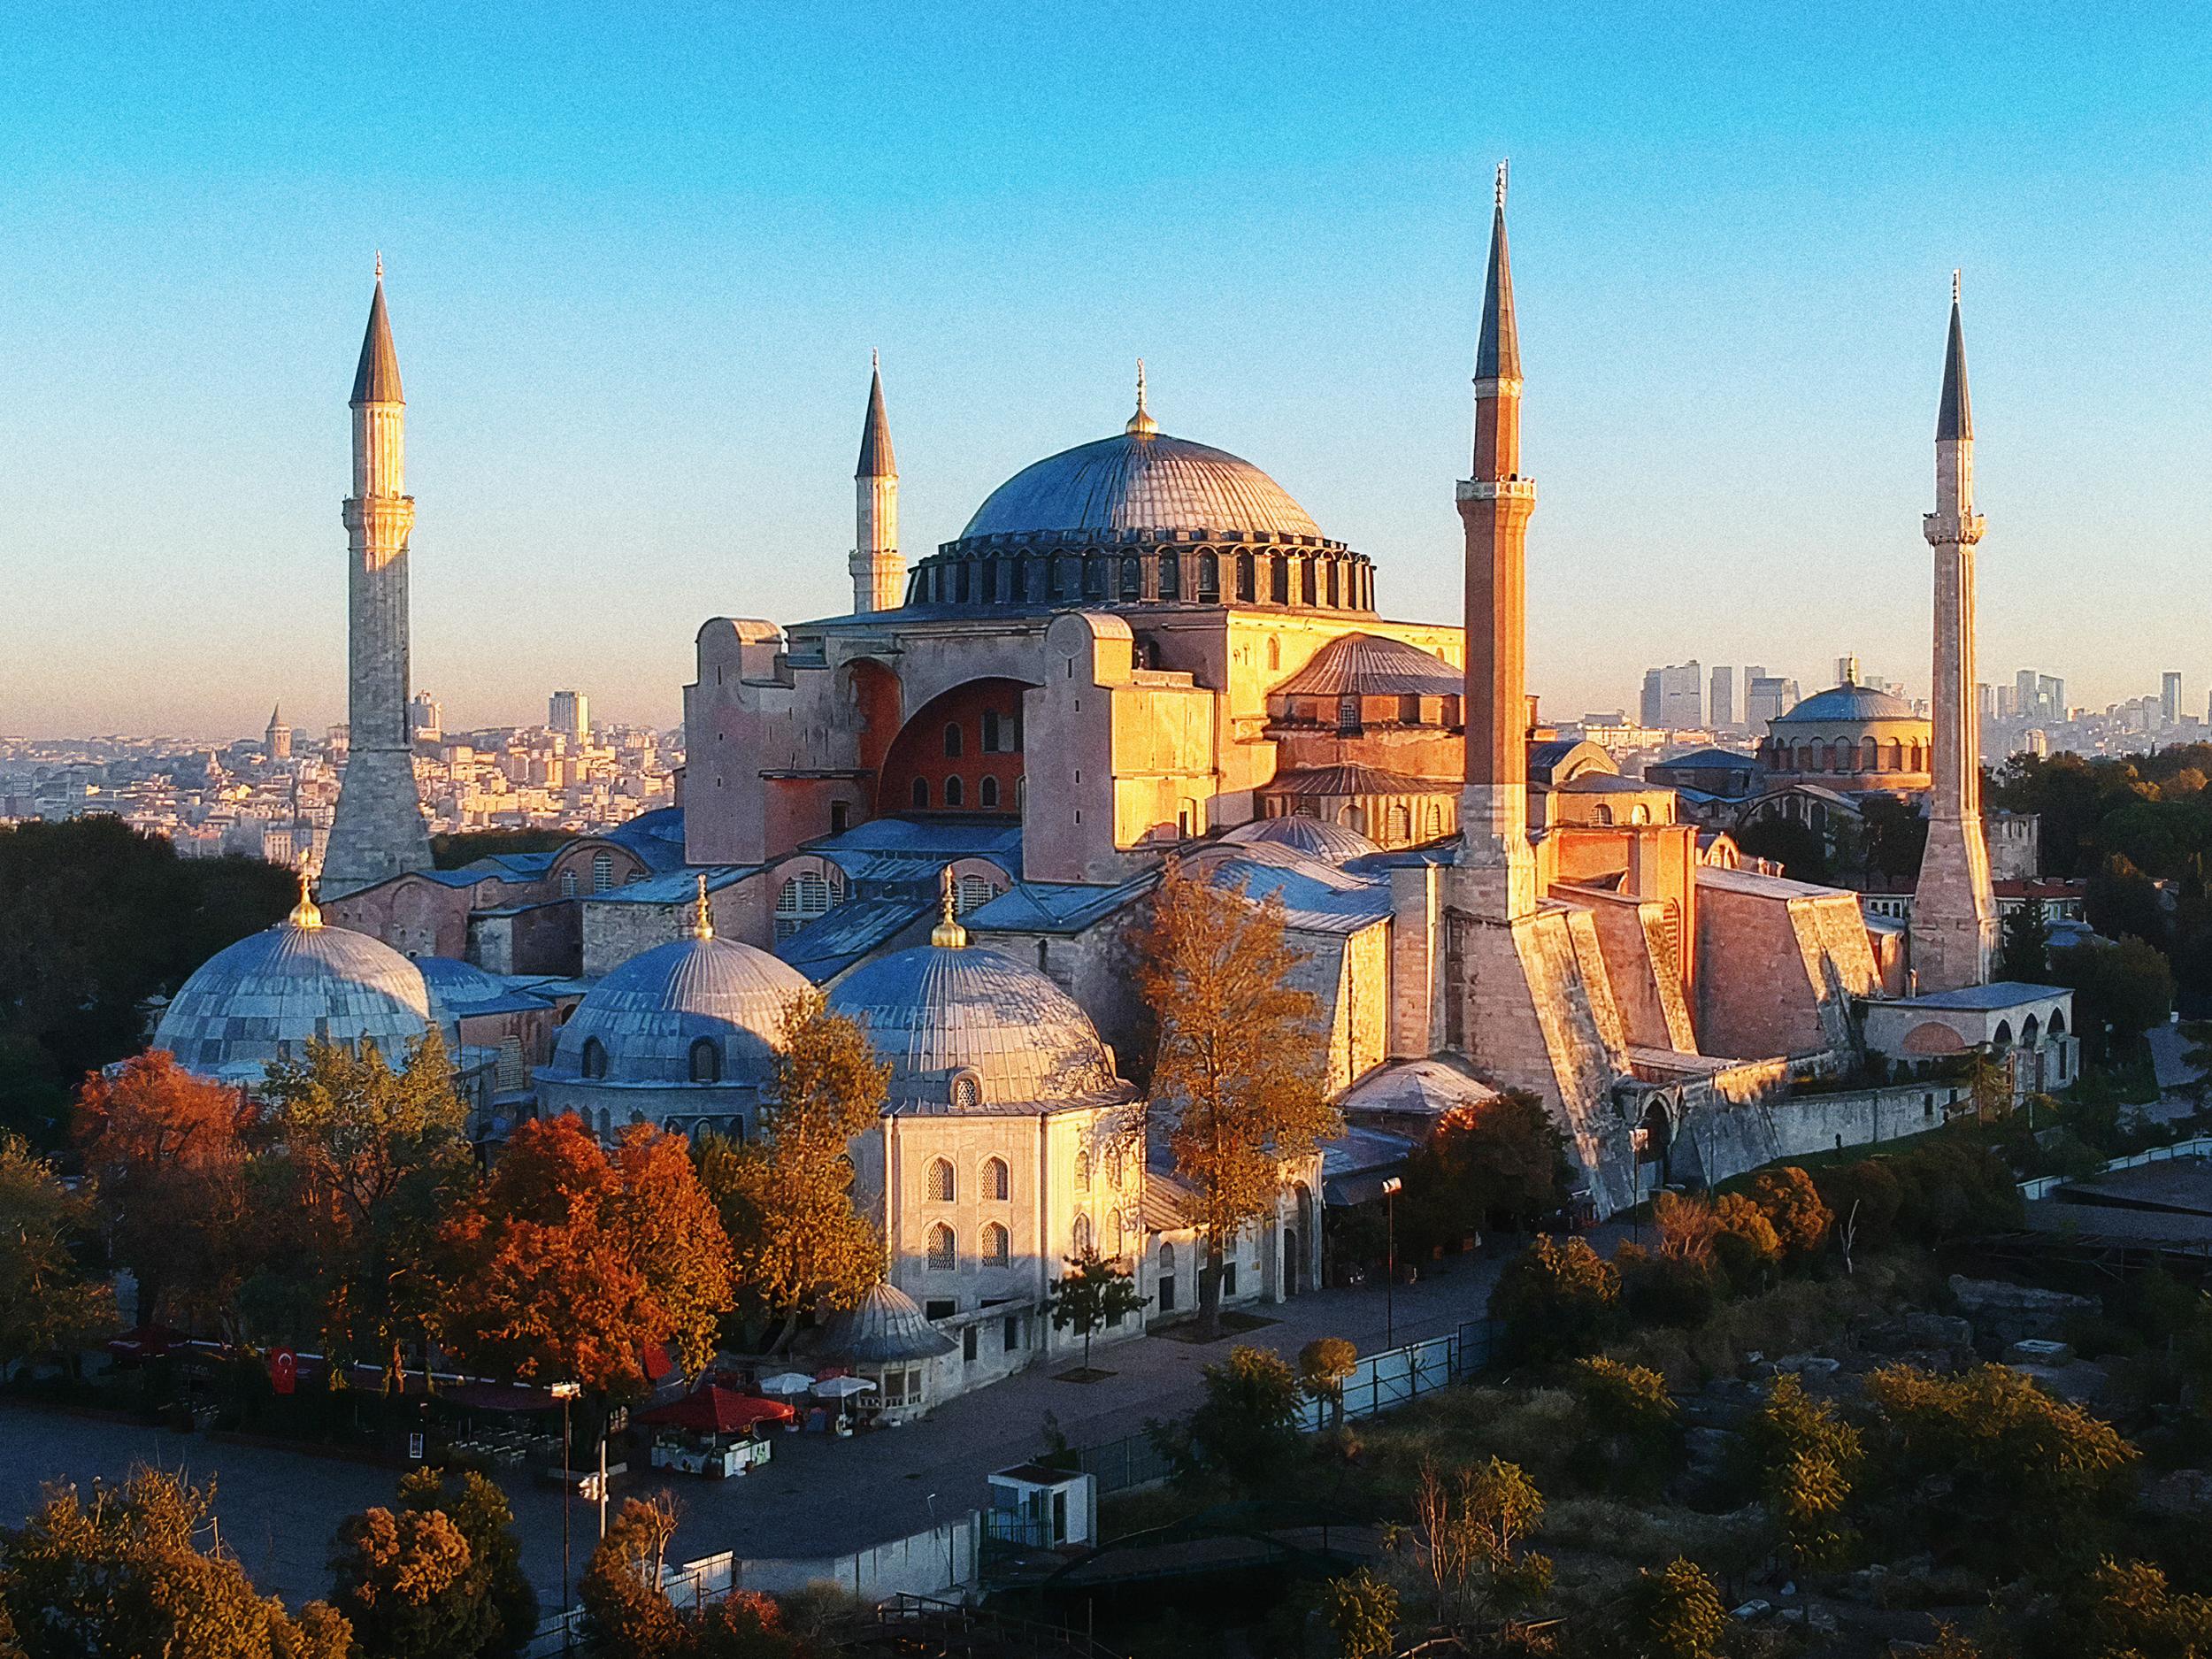 <p>Hagia Sophia today: Over the past 1500 years it has been a Greek Orthodox and Catholic cathedral, an Ottoman mosque, a museum - and again now a mosque</p>